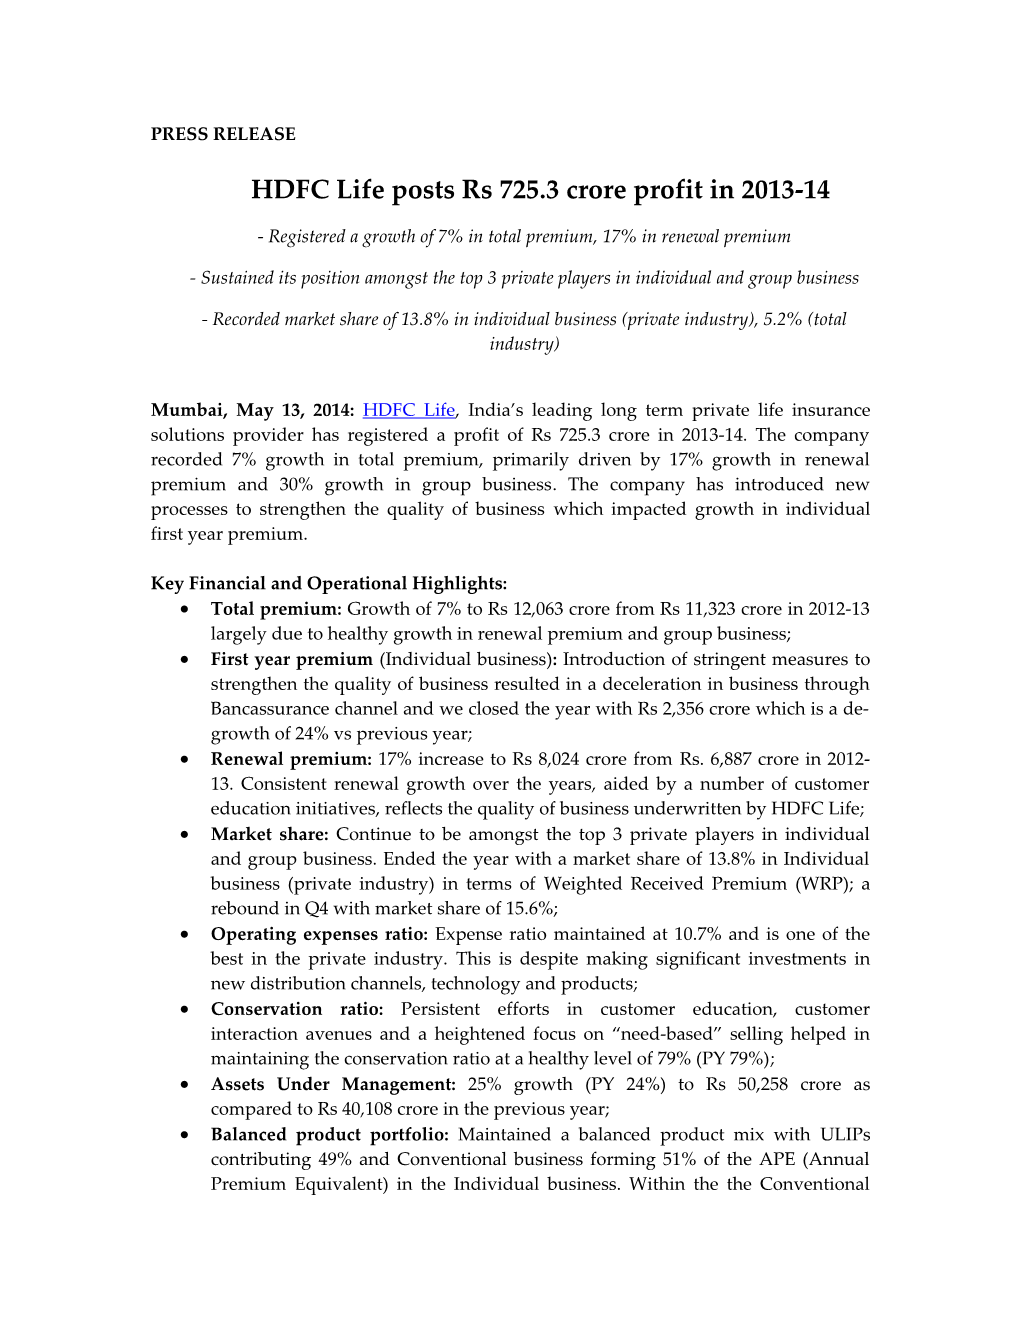 HDFC Life Posts Rs 725.3 Crore Profit in 2013-14